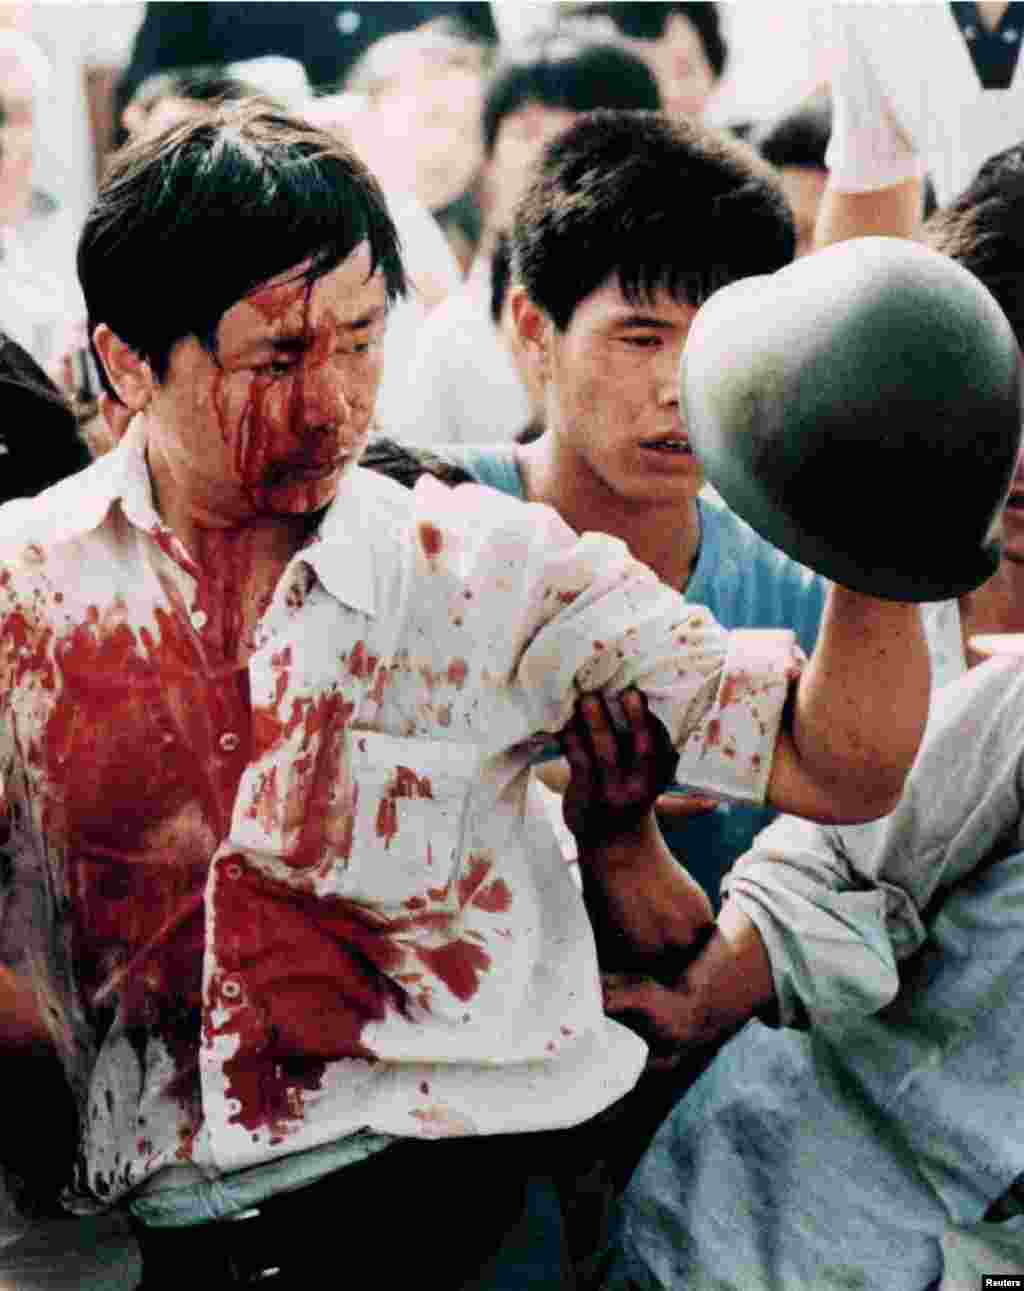 A blood-covered protester holds a Chinese soldier's helmet following violent clashes with military forces during pro-democracy demonstrations in Beijing's Tiananmen Square, June 4, 1989.